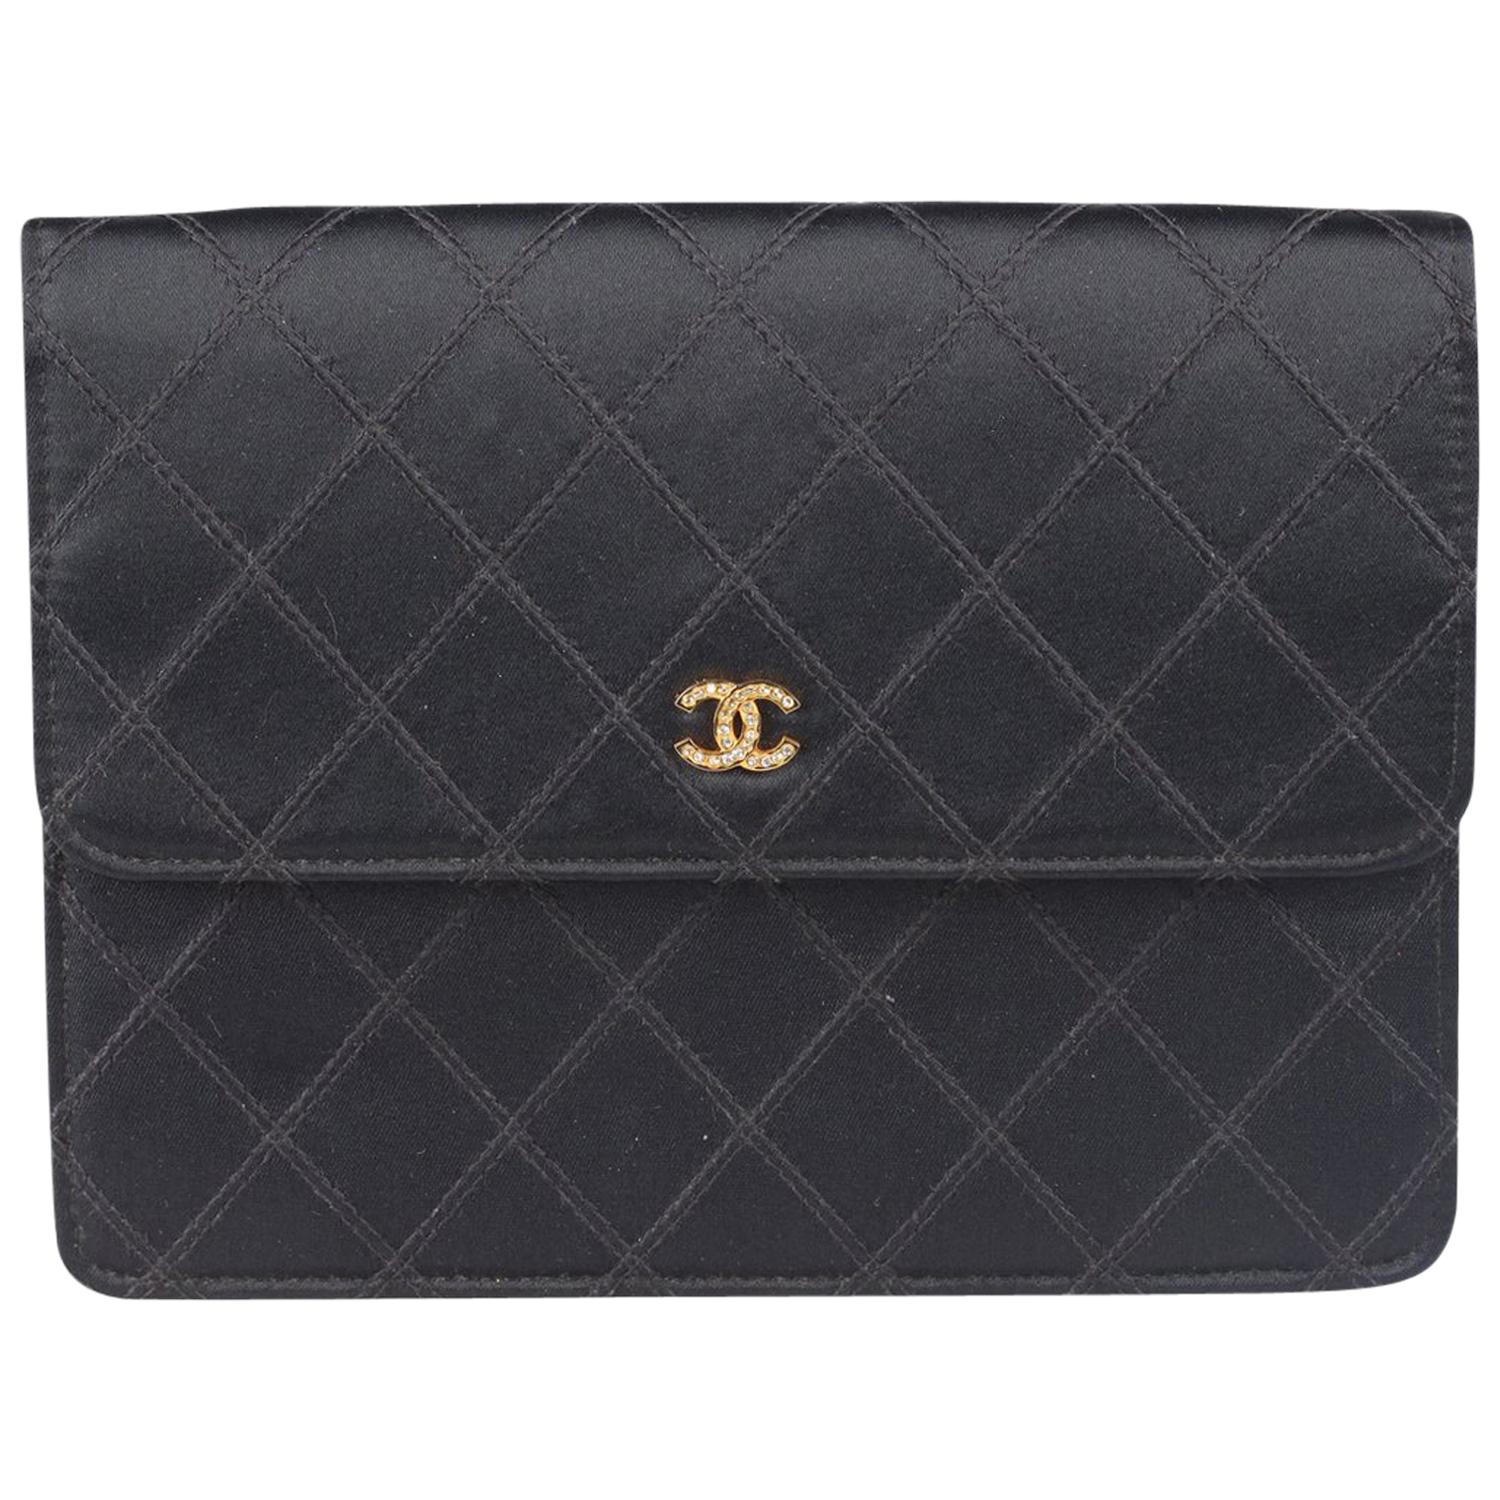 Chanel Vintage Black Quilted Satin Clutch Evening Bag with Rhinestones